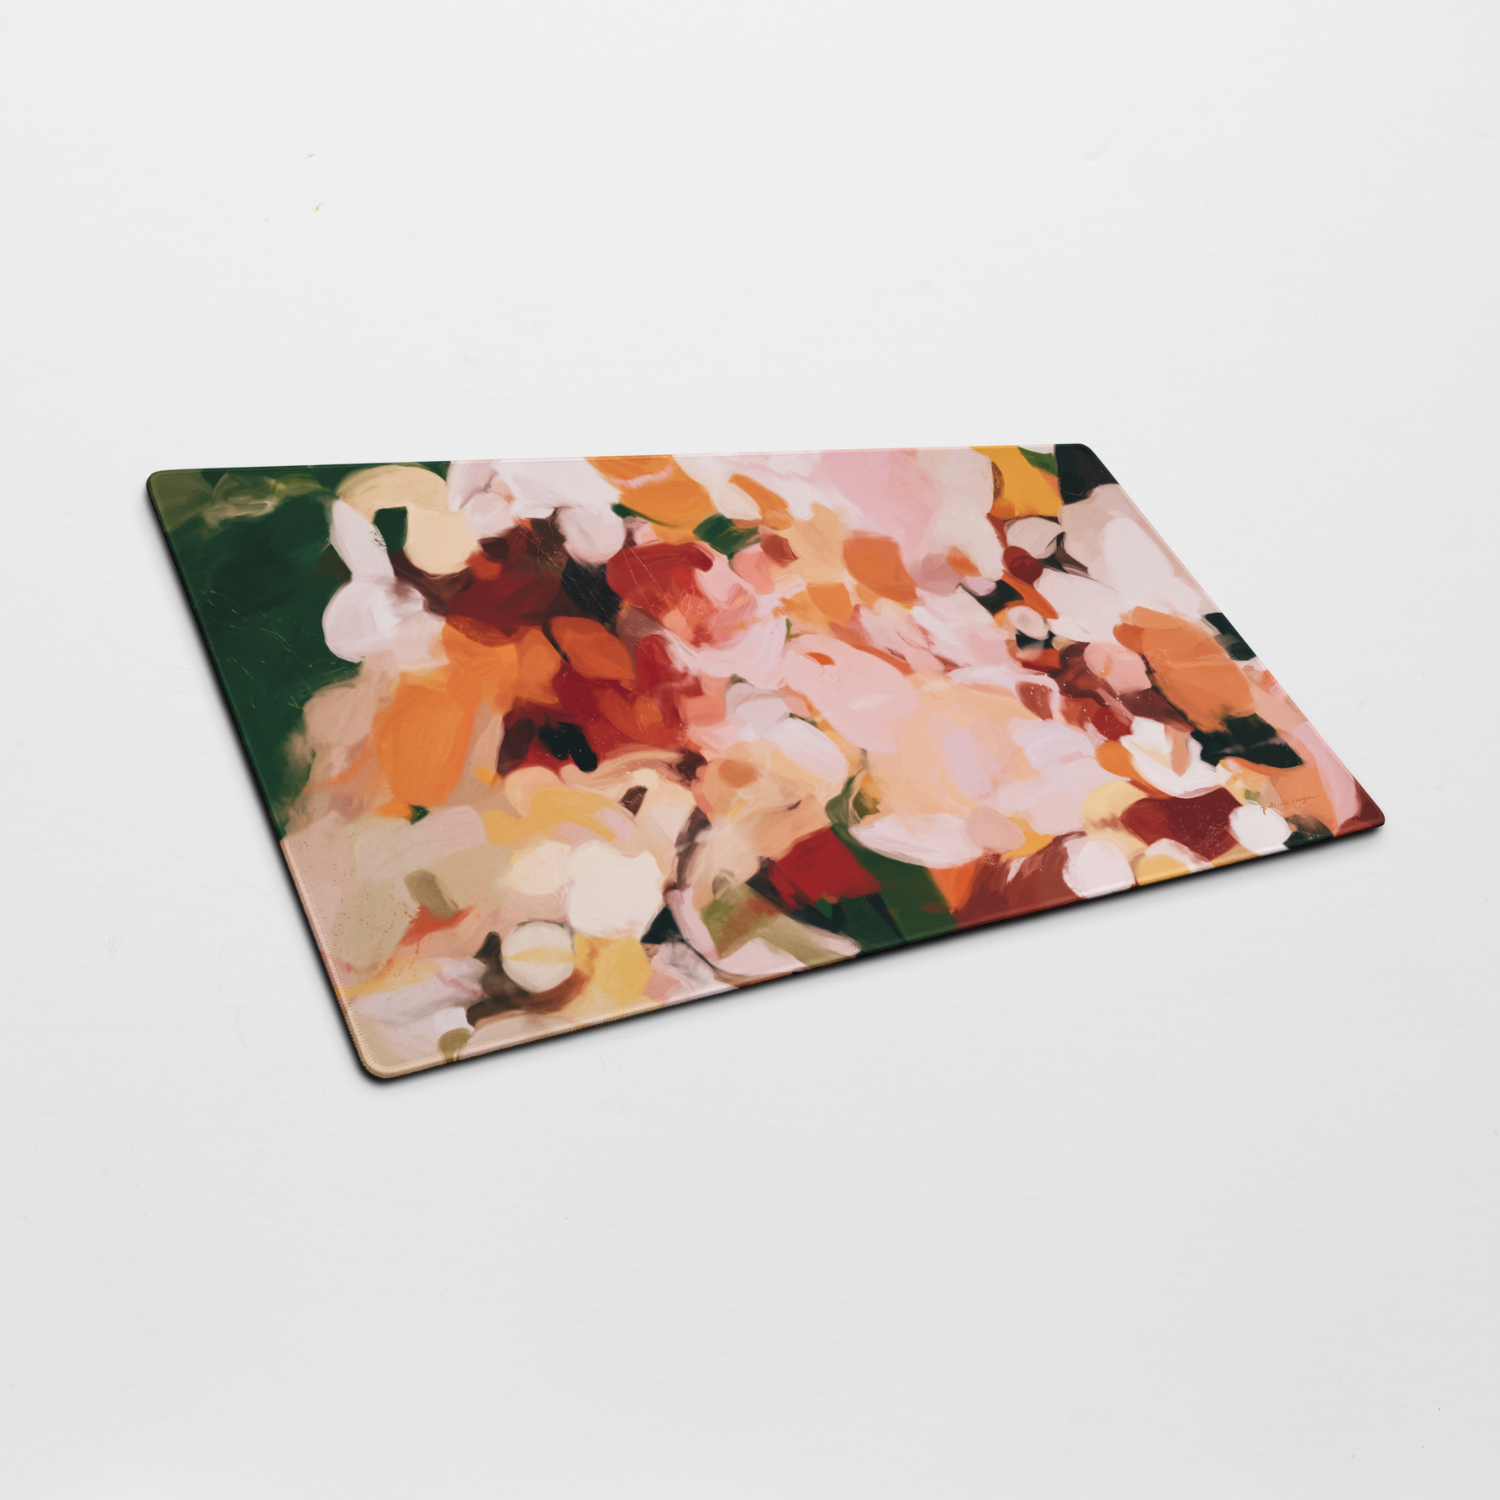 The Grove, colorful mouse pad for styling your office desk. Featuring artwork by Parima Studio. Home office styling accessories, cubicle styling accessories.